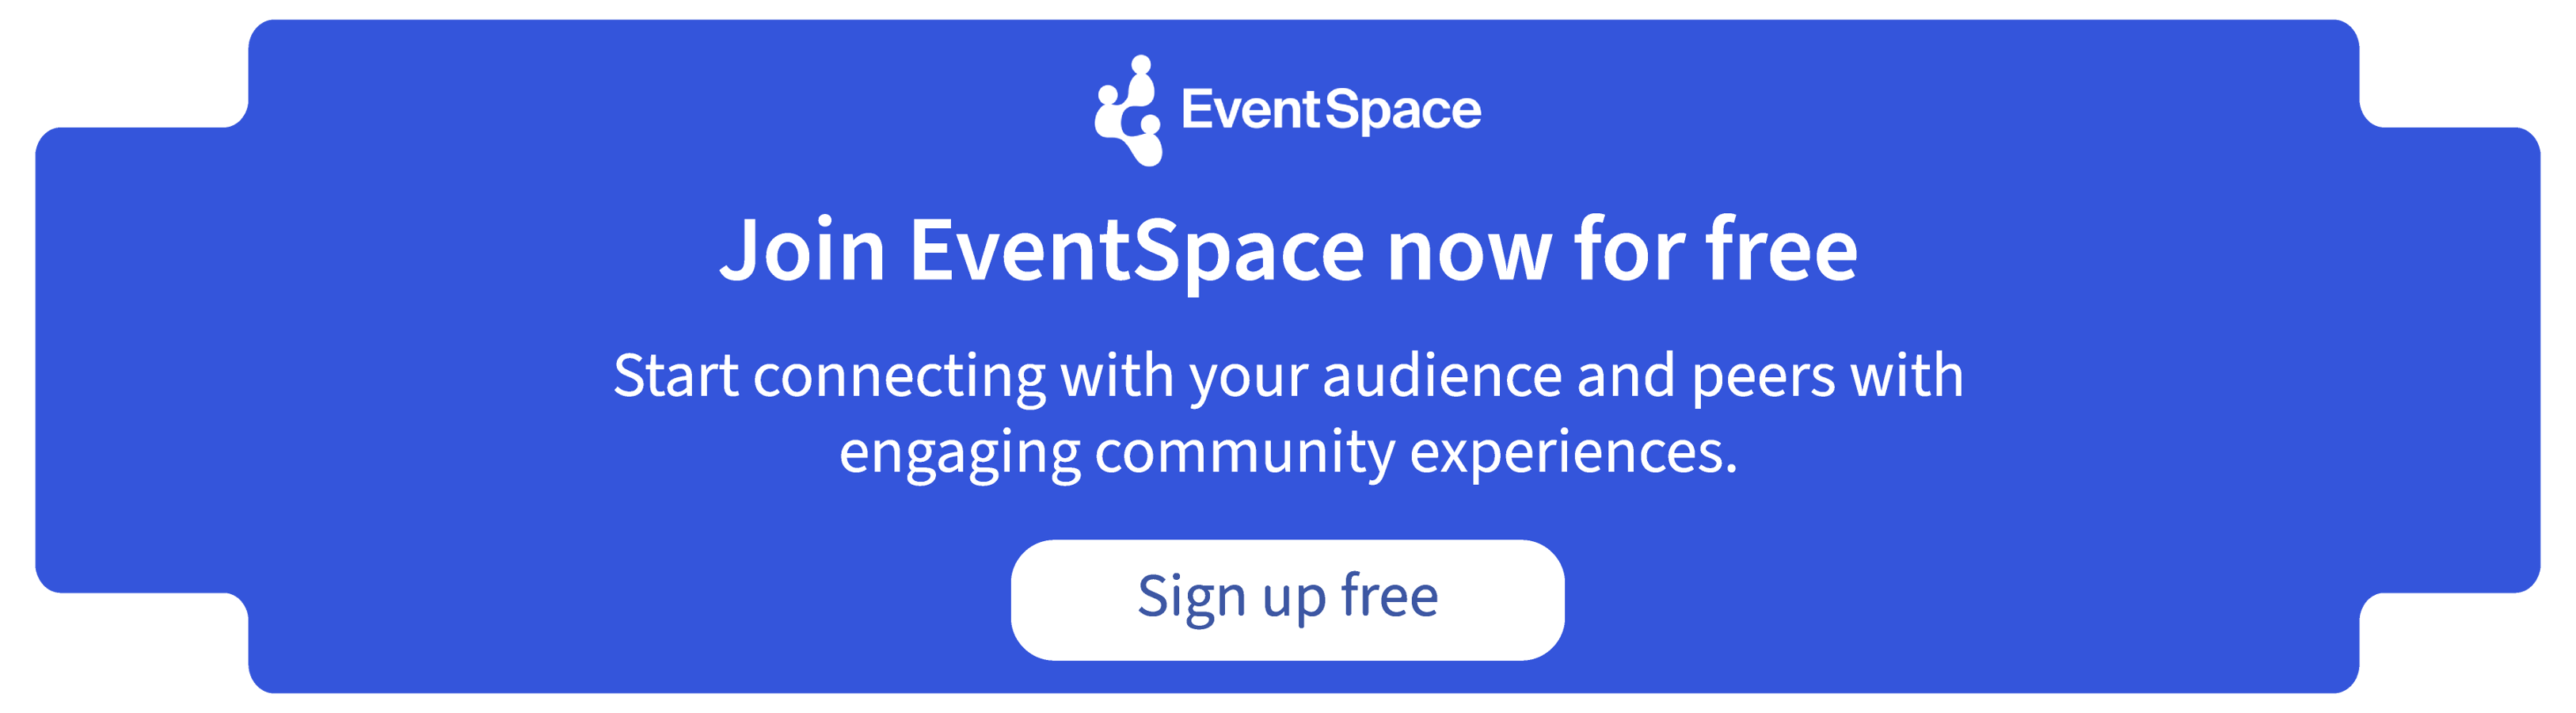 Sign up for EventSpace